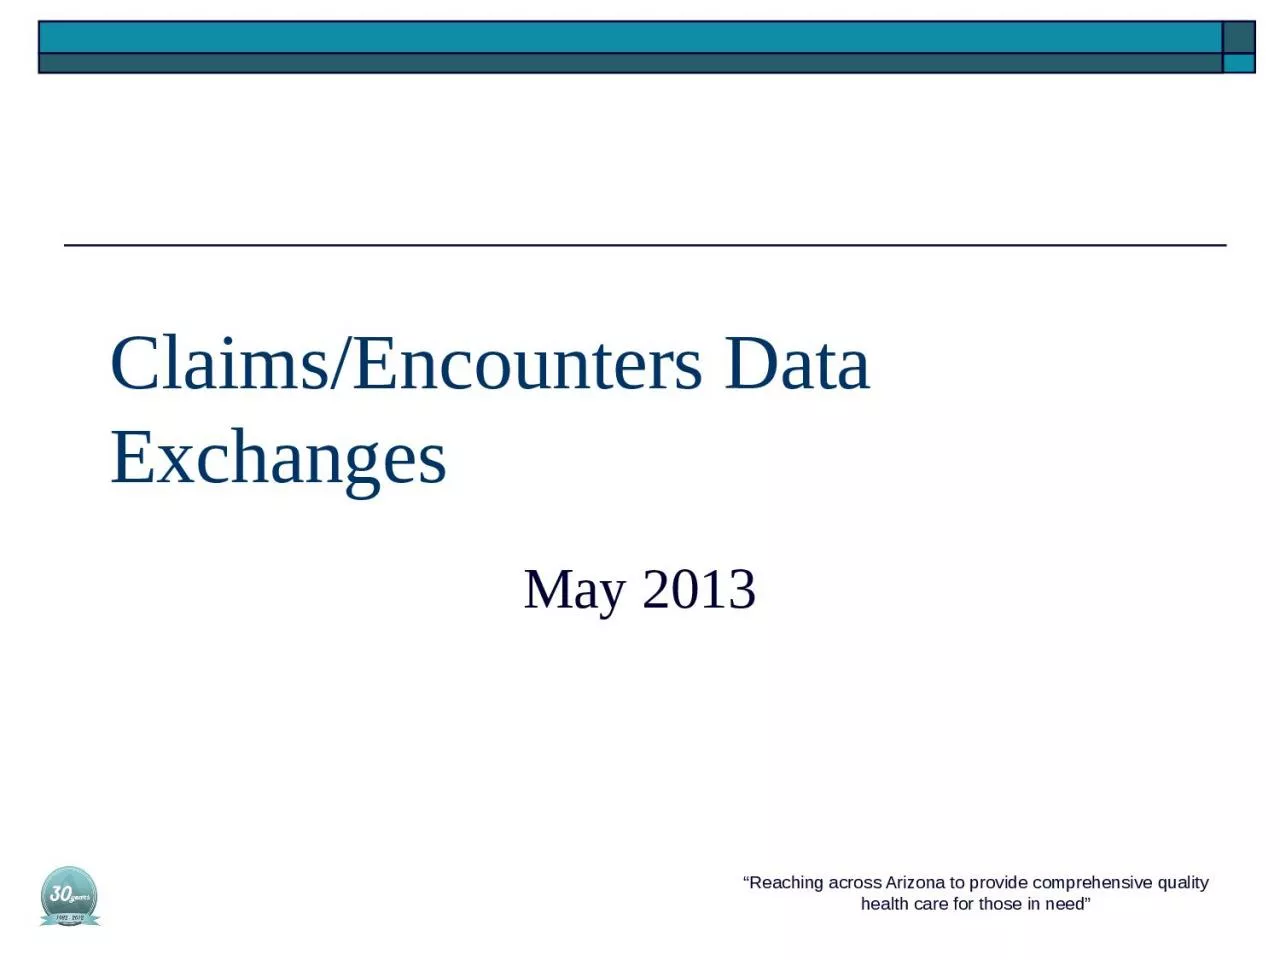 Claims/Encounters Data Exchanges